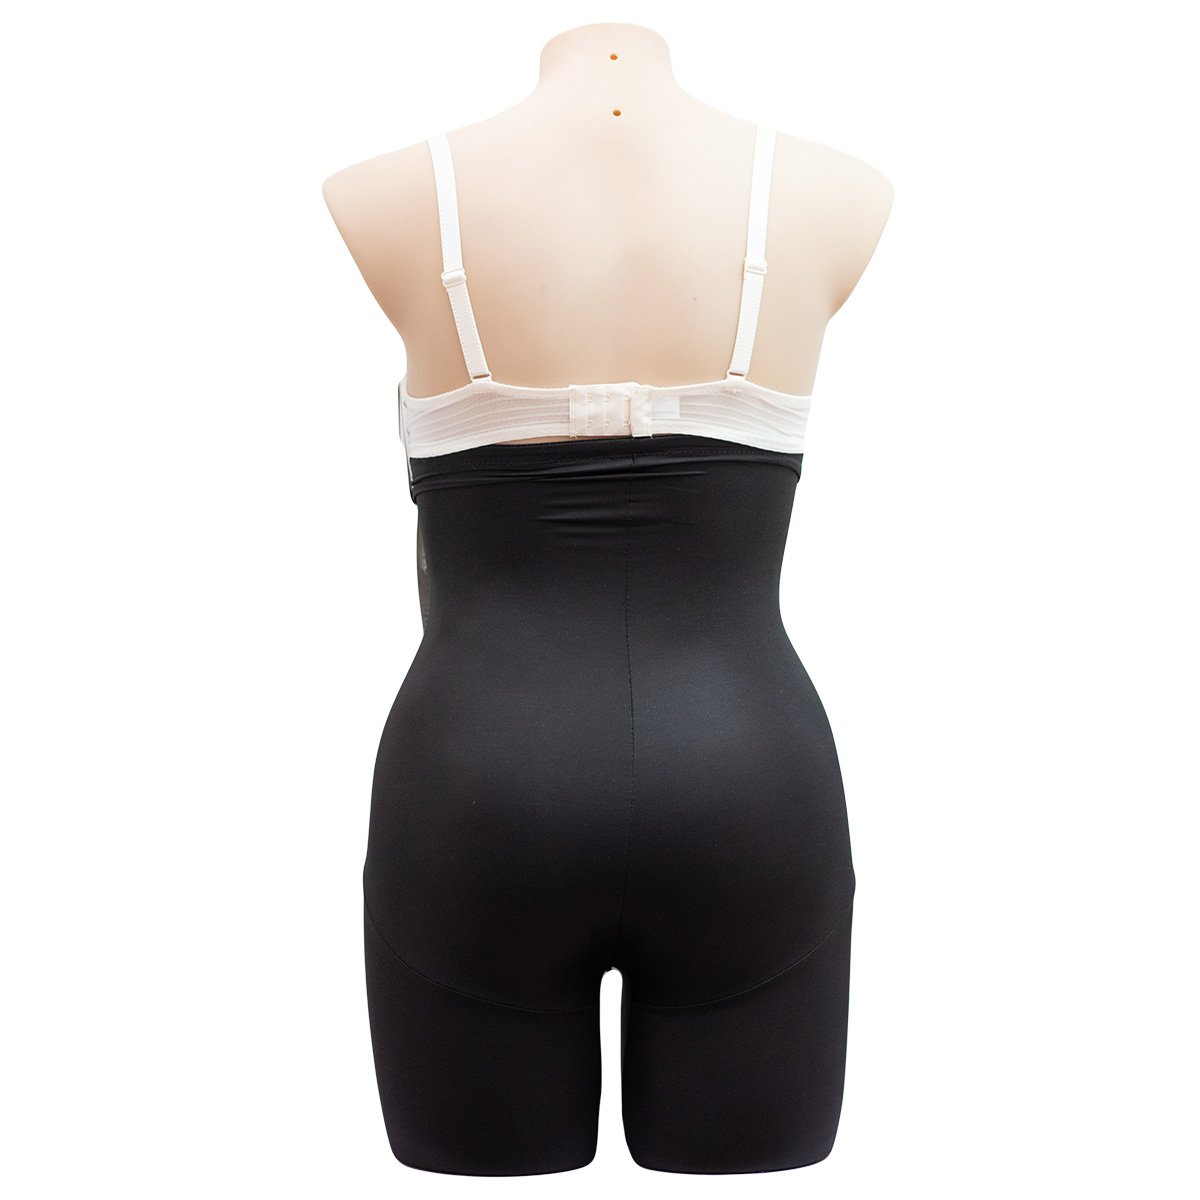 Naomi & Nicole Hi Waist Thigh Slimmer Comfortable Firm - Shapewear  Available at Illusions Lingerie